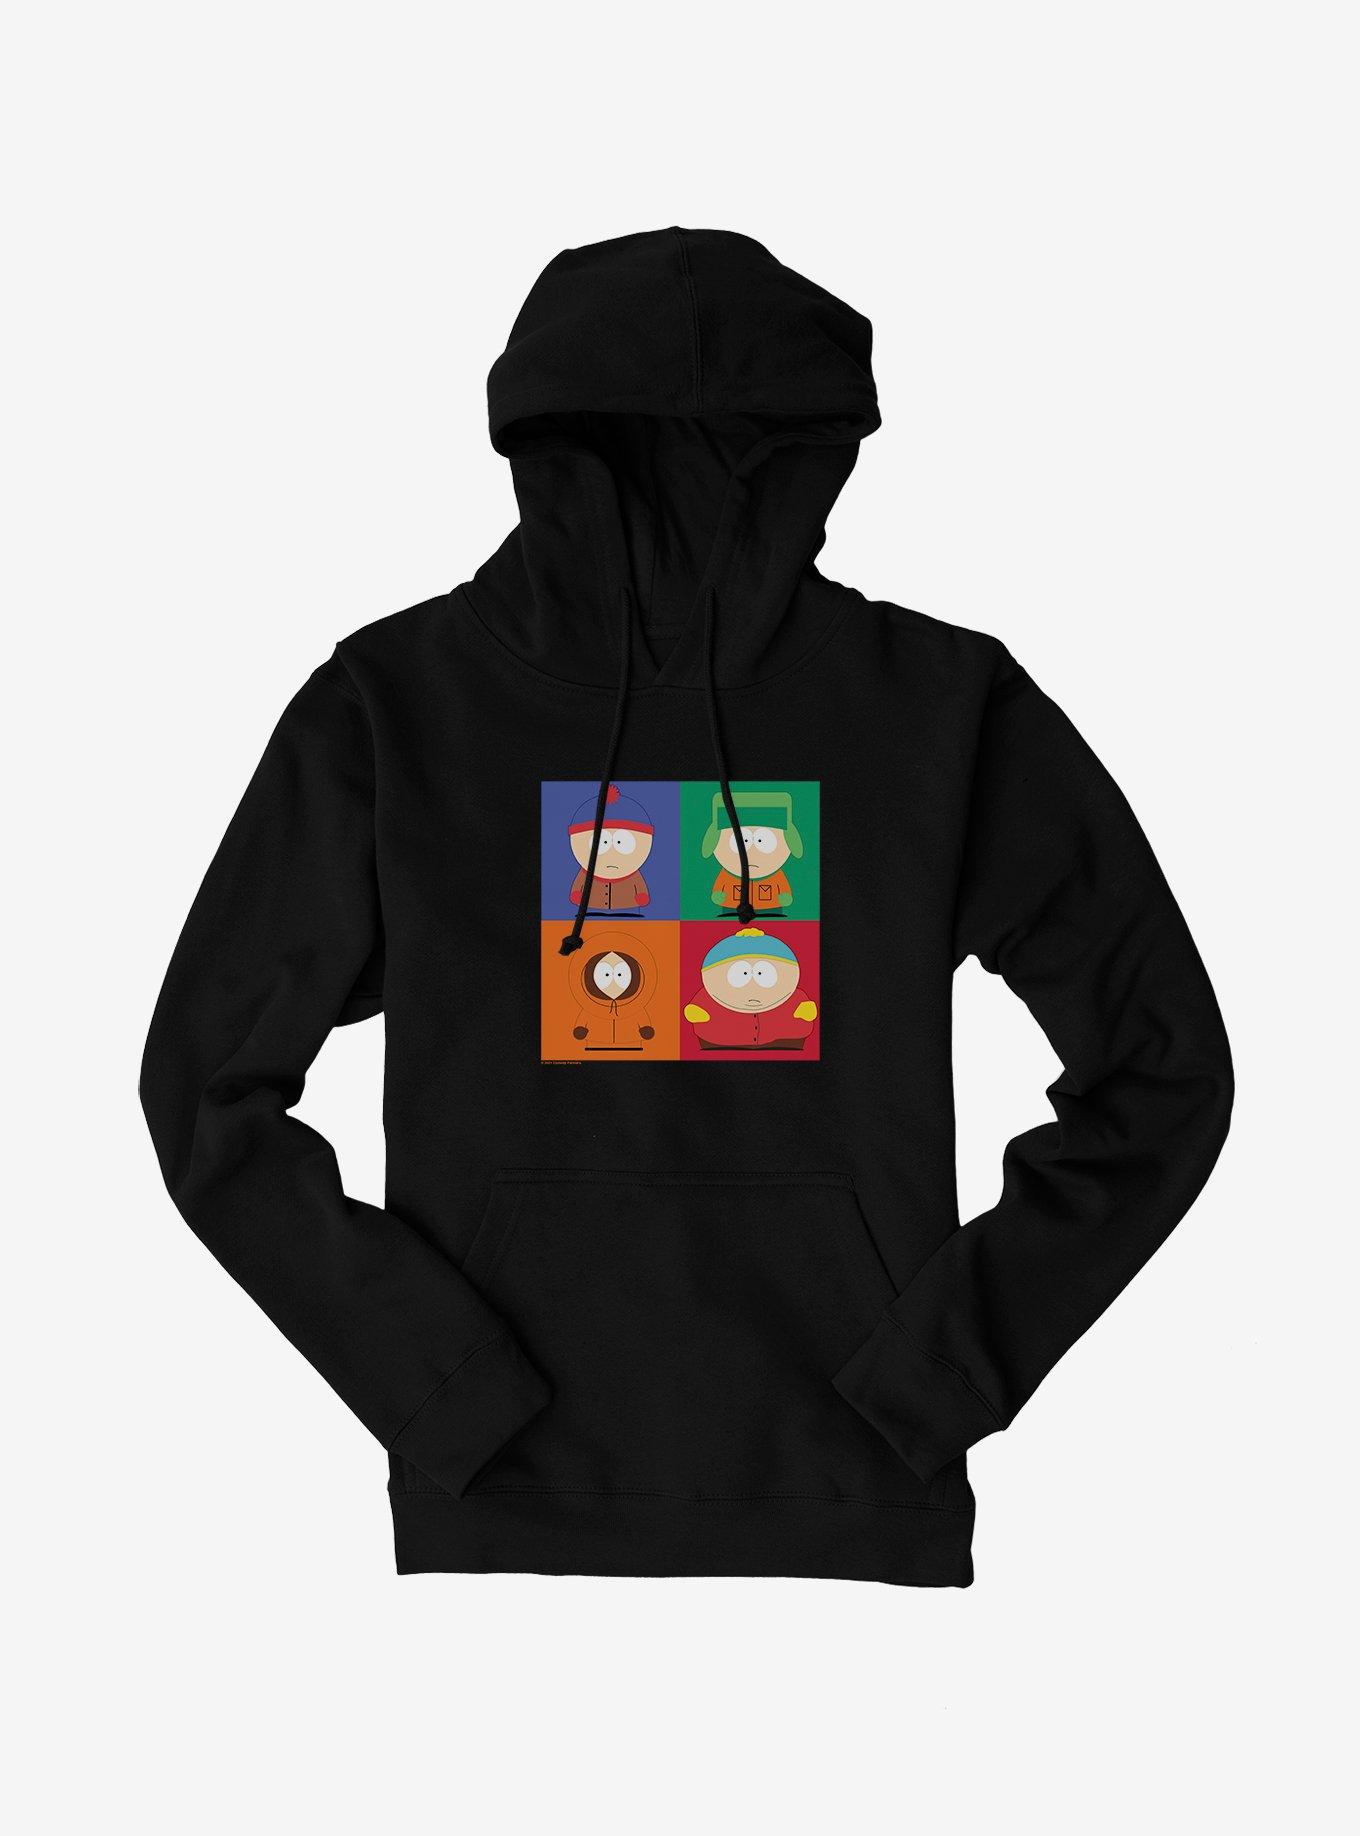 South Park The Boy Bunch Hoodie